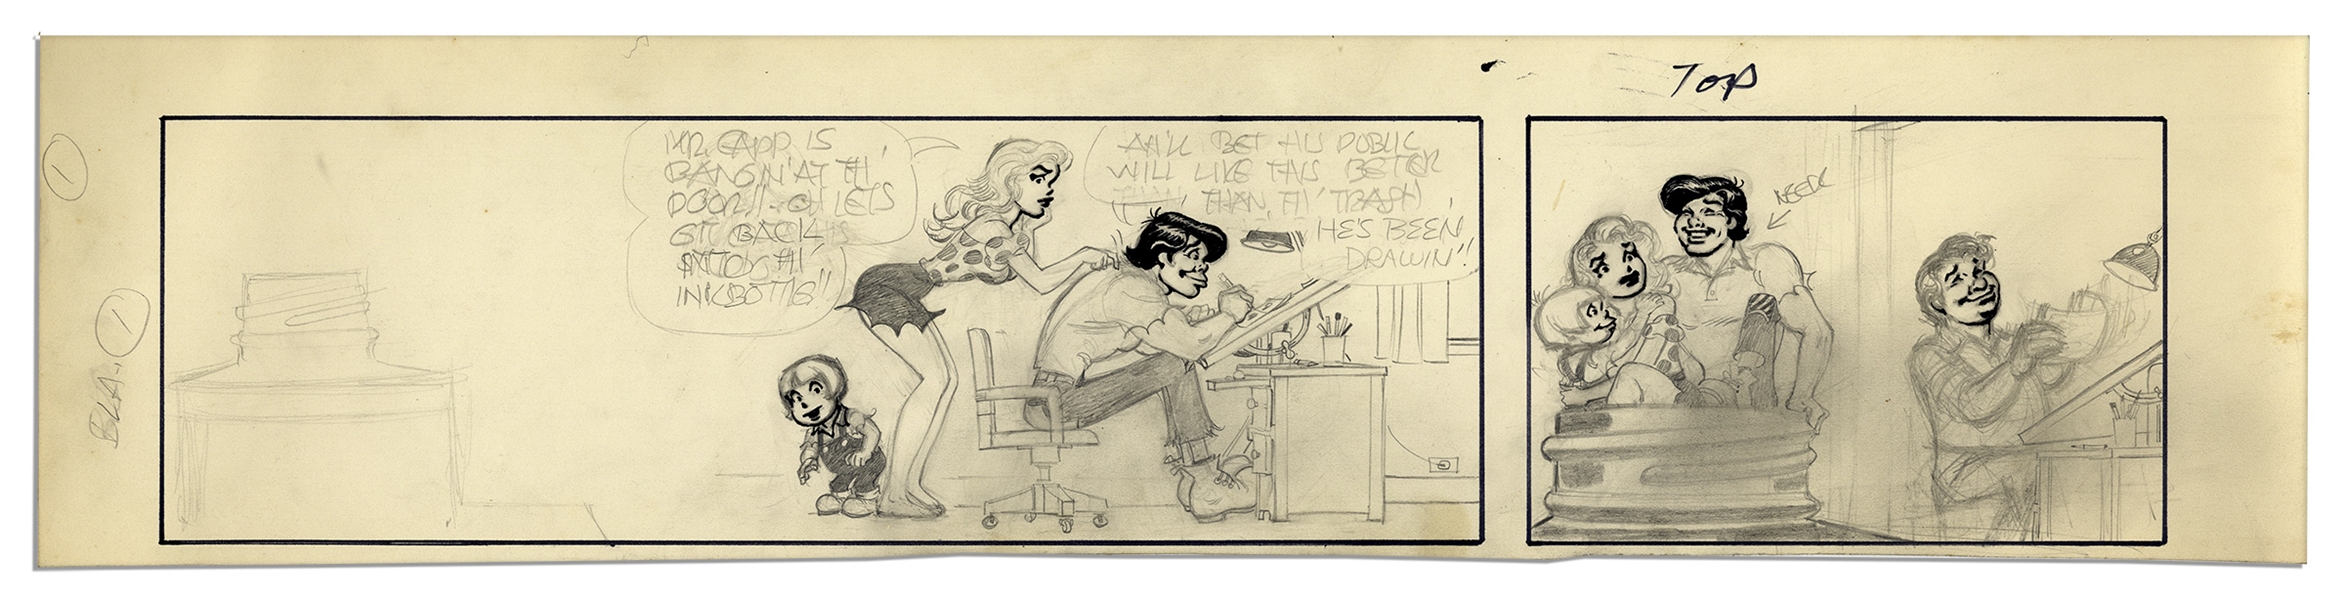 ''Li'l Abner'' Unfinished Comic by Al Capp in Pencil & Ink -- Undated & Featuring Li'l Abner, Daisy Mae & Honest Abe at Capp's Drawing Desk -- 23'' x 5.5'' -- Very Good -- From Capp Estate